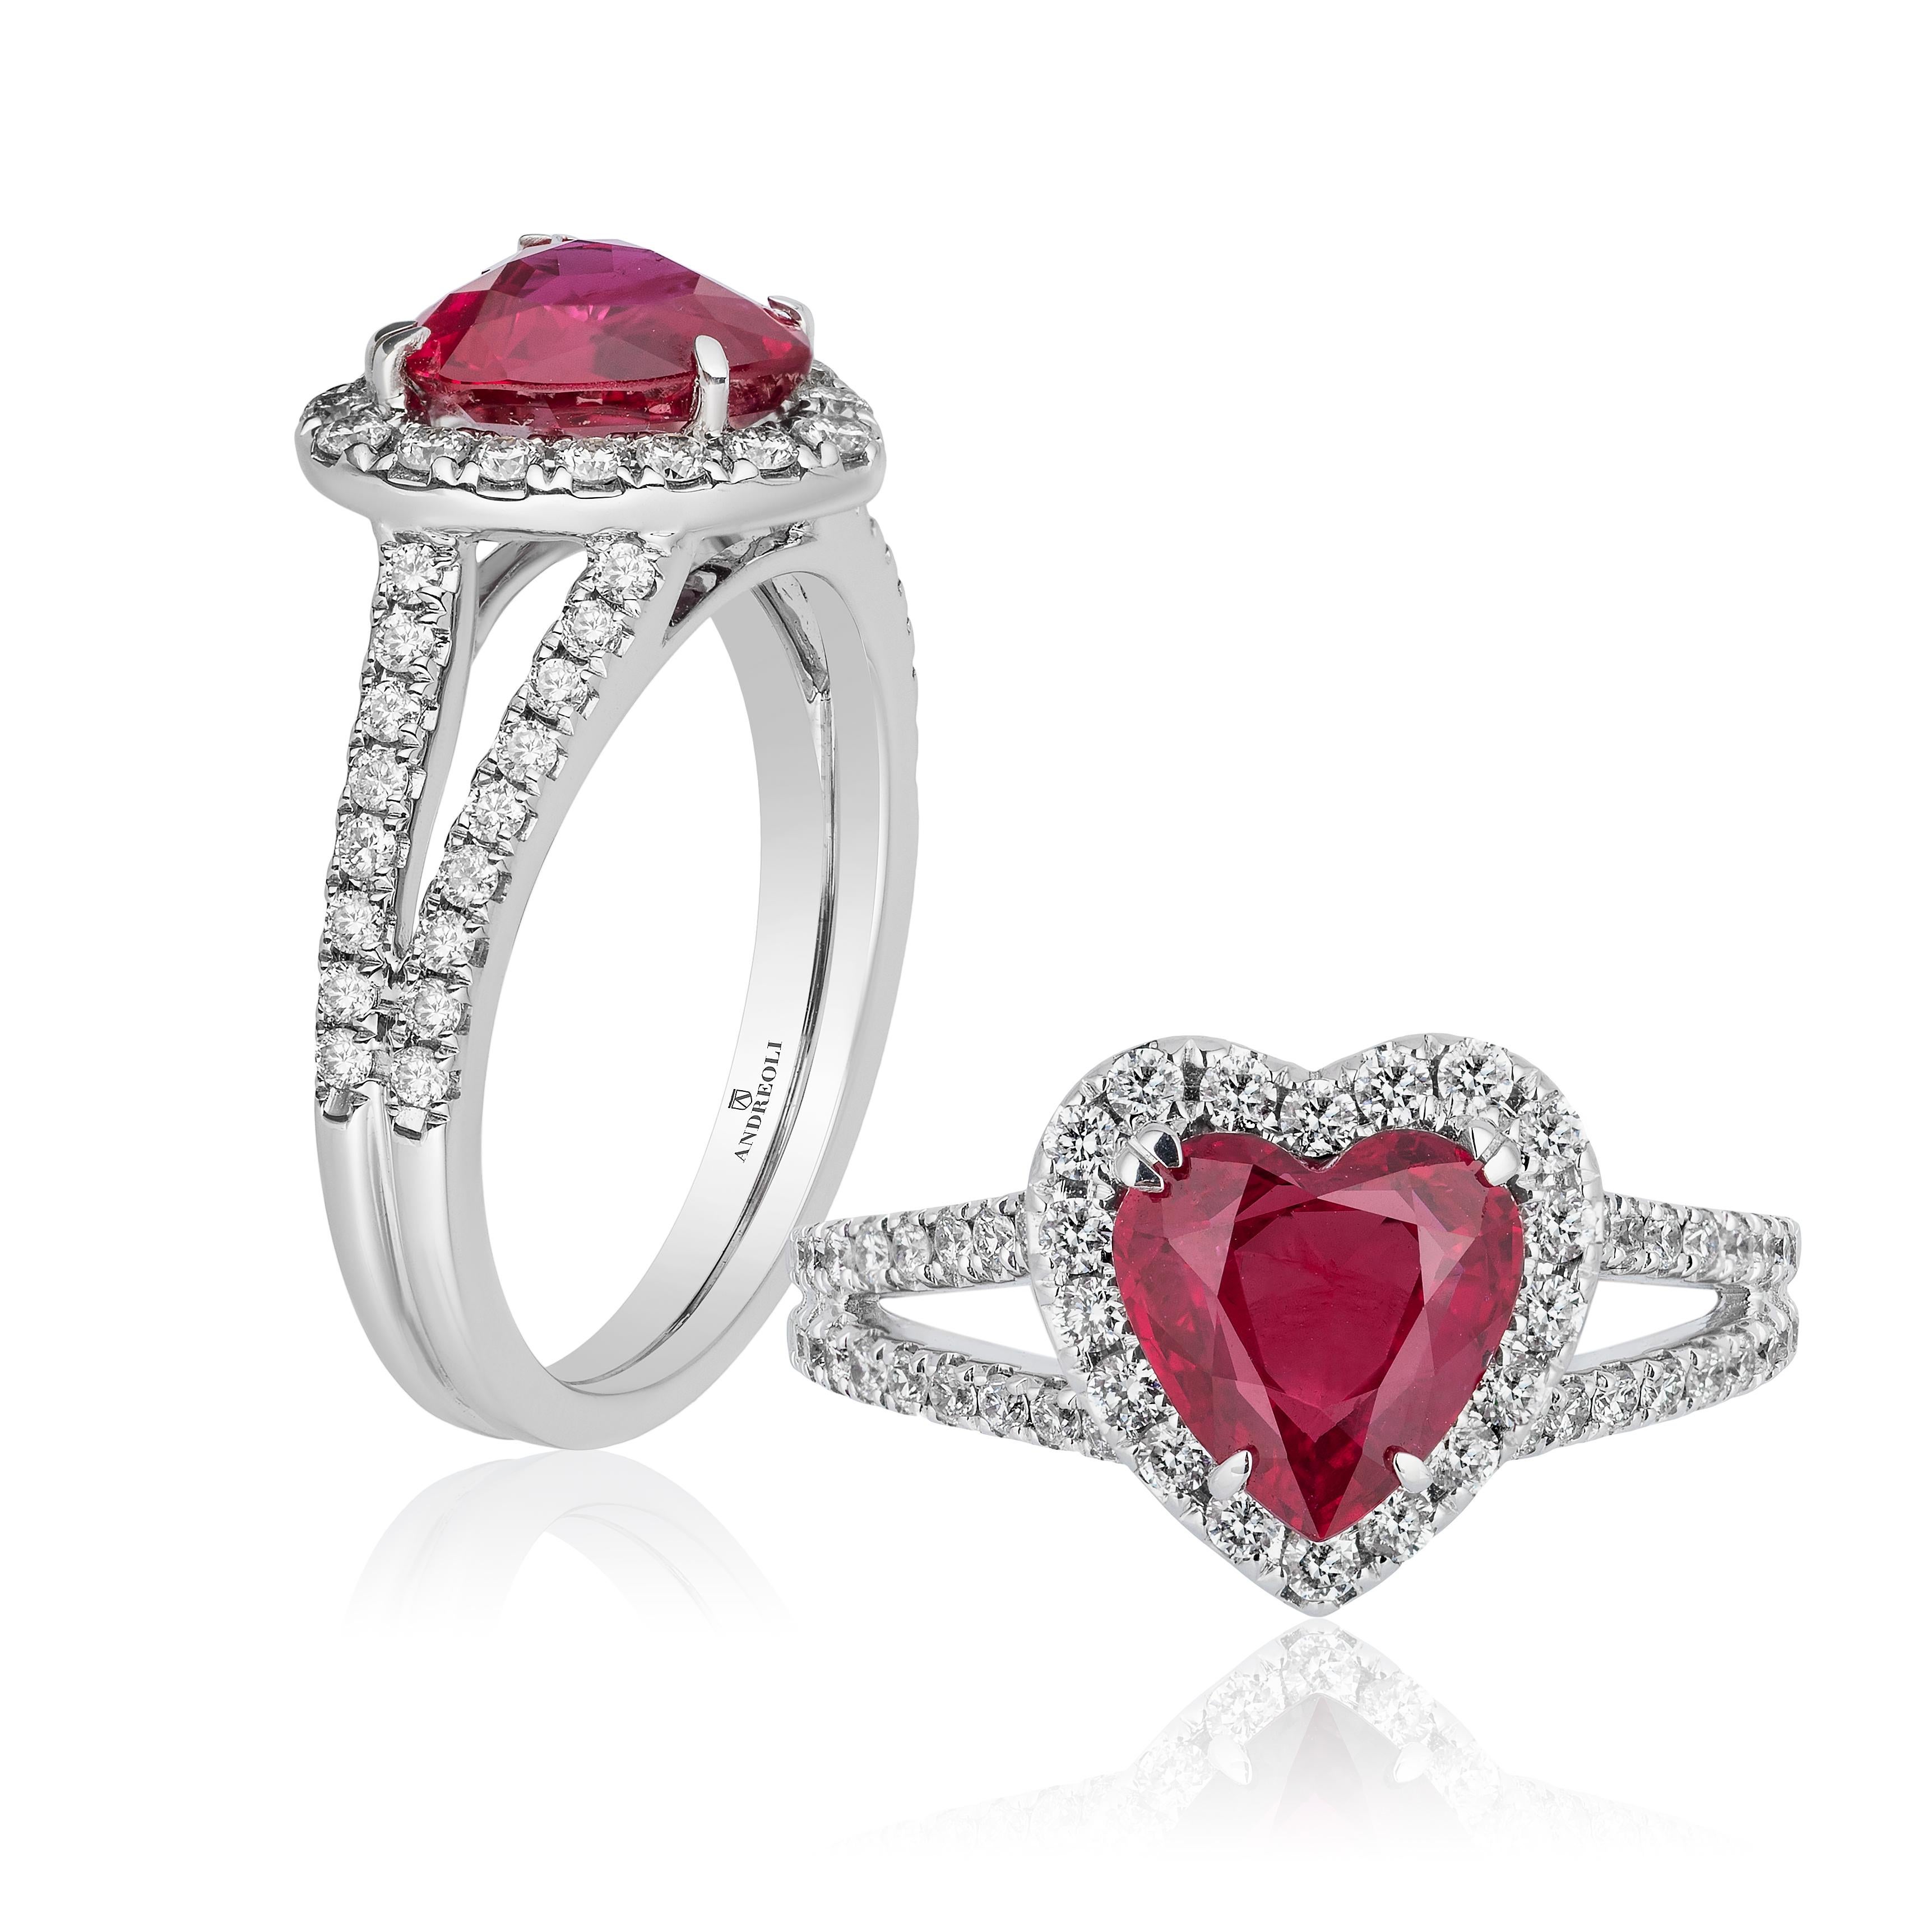 Andreoli 1.93 Carat Burma Ruby Heart Shape Diamond 18 Karat White Gold Ring

This ring features:
- 0.55 carat F-G-H Color, VS-SI Clarity round brilliant cut diamonds
- 1.93 carat Burma Origin Heart Shape Ruby
- Set in 18 Karat White Gold


